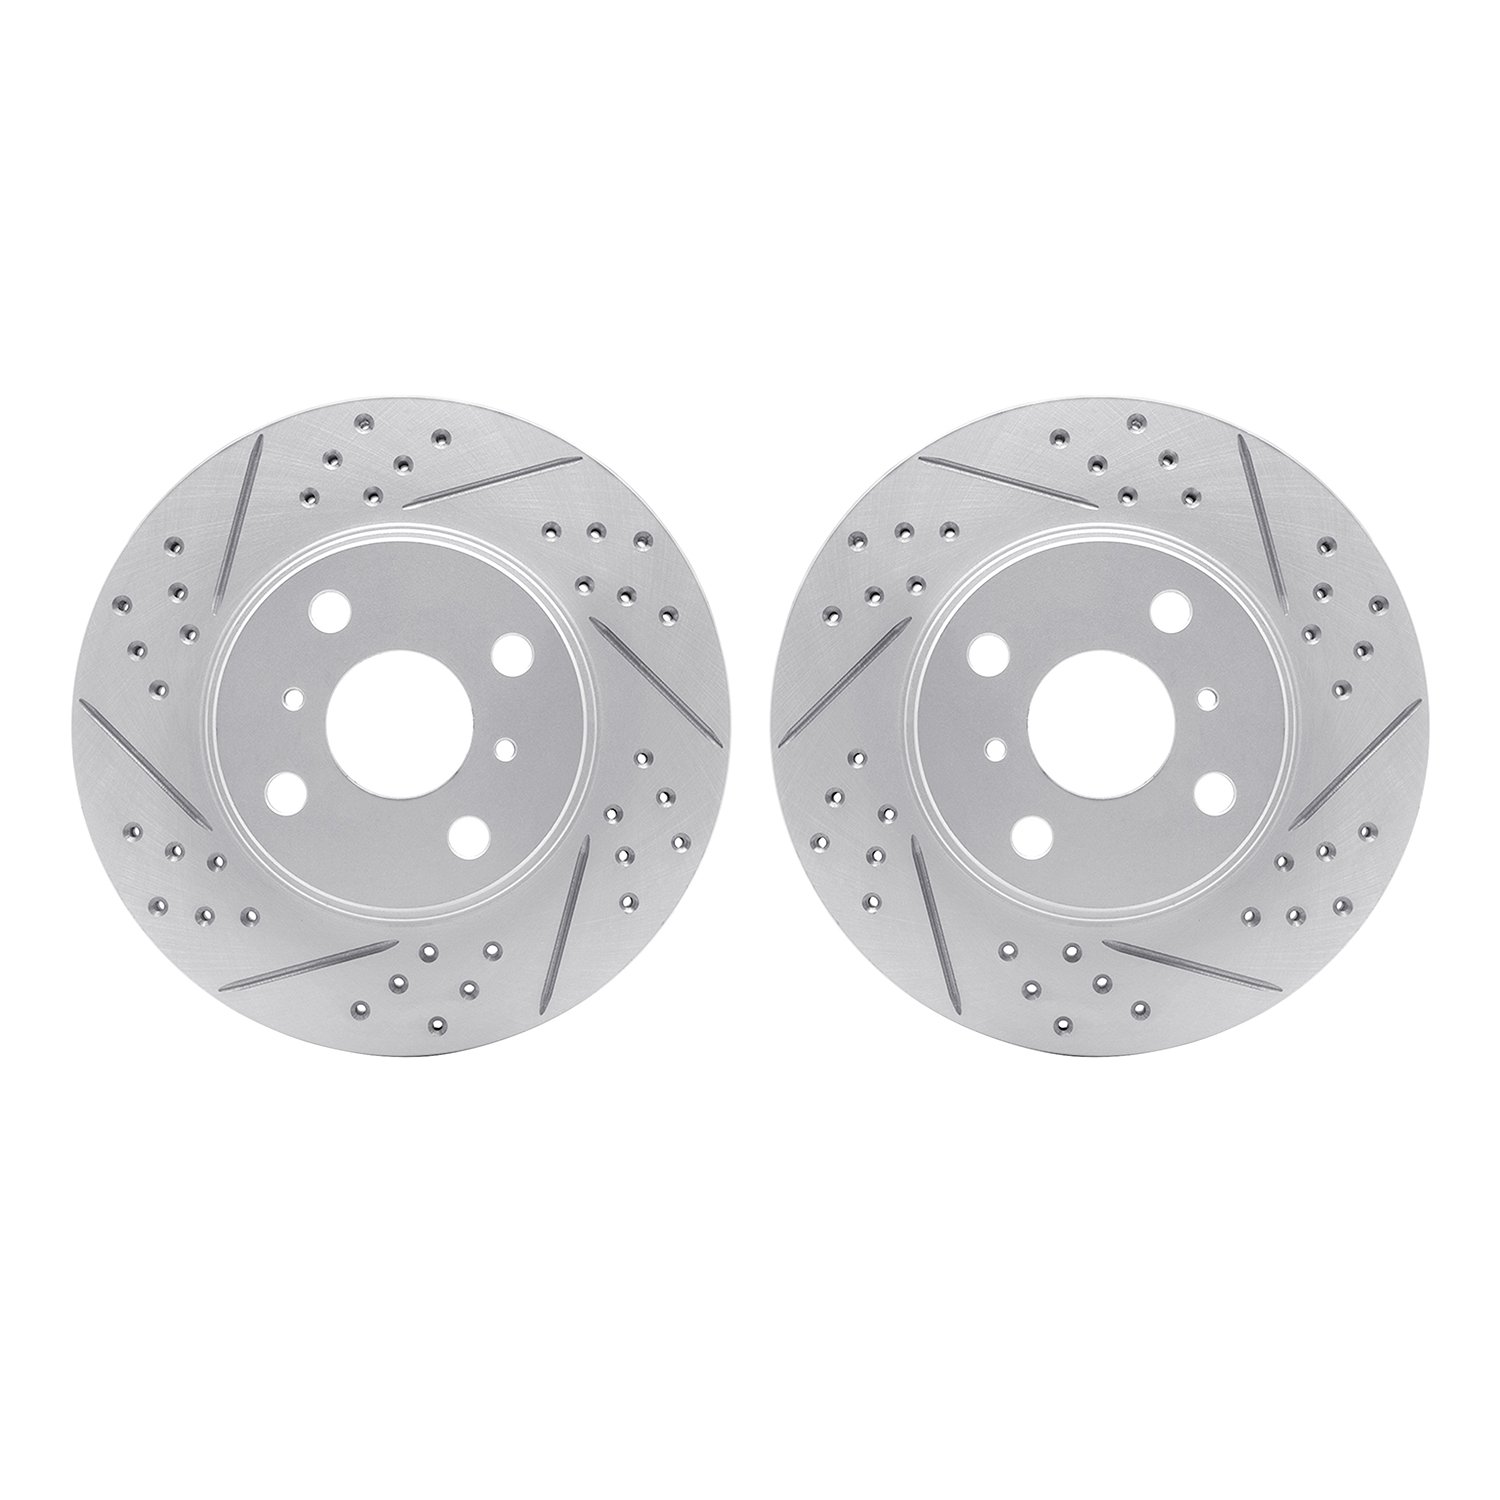 2002-91002 Geoperformance Drilled/Slotted Brake Rotors, 2004-2006 Lexus/Toyota/Scion, Position: Front